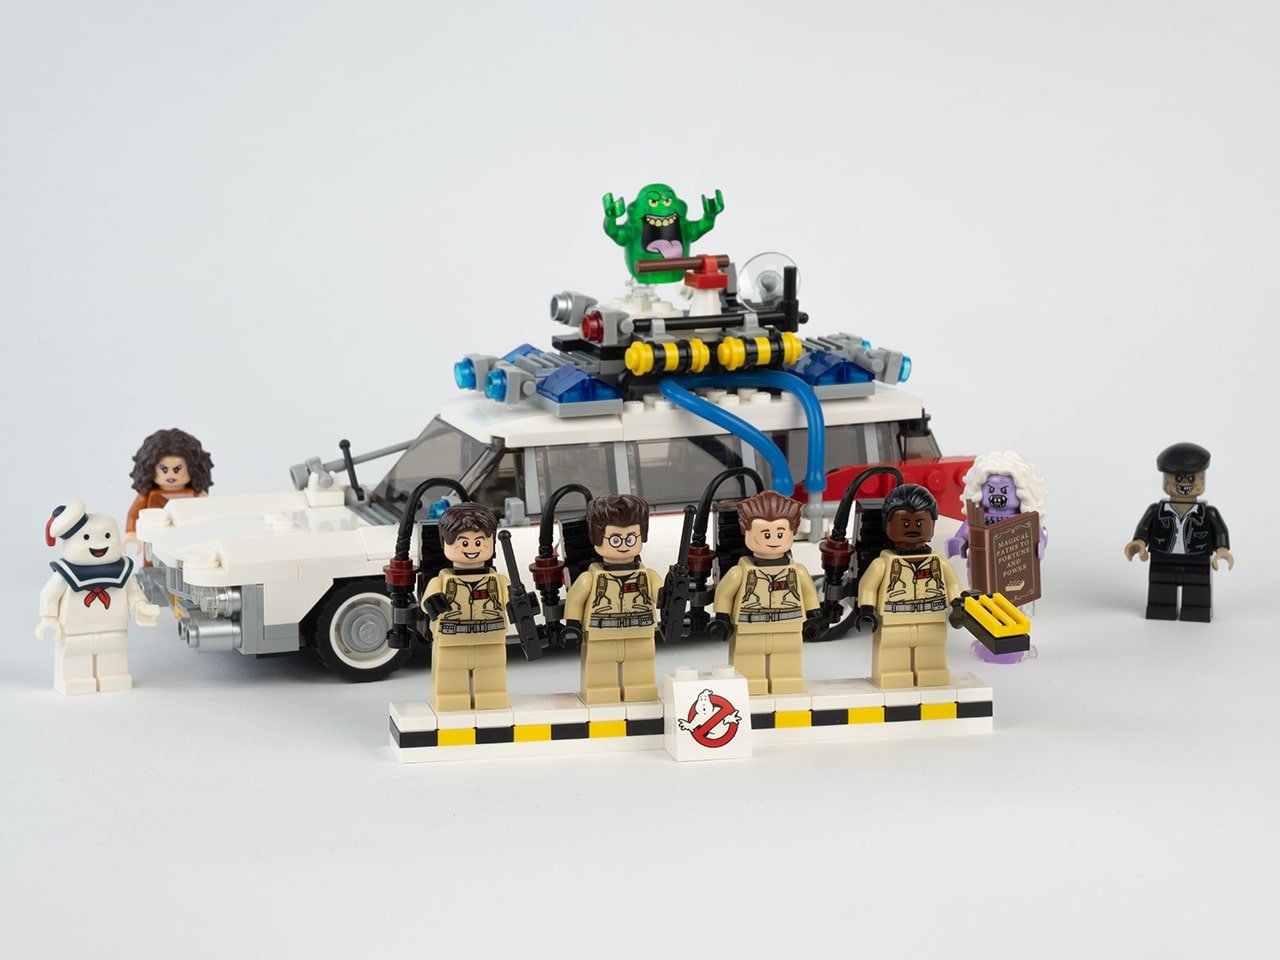 LEGO 10274 Ghostbusters Ecto-1 kommt 2021